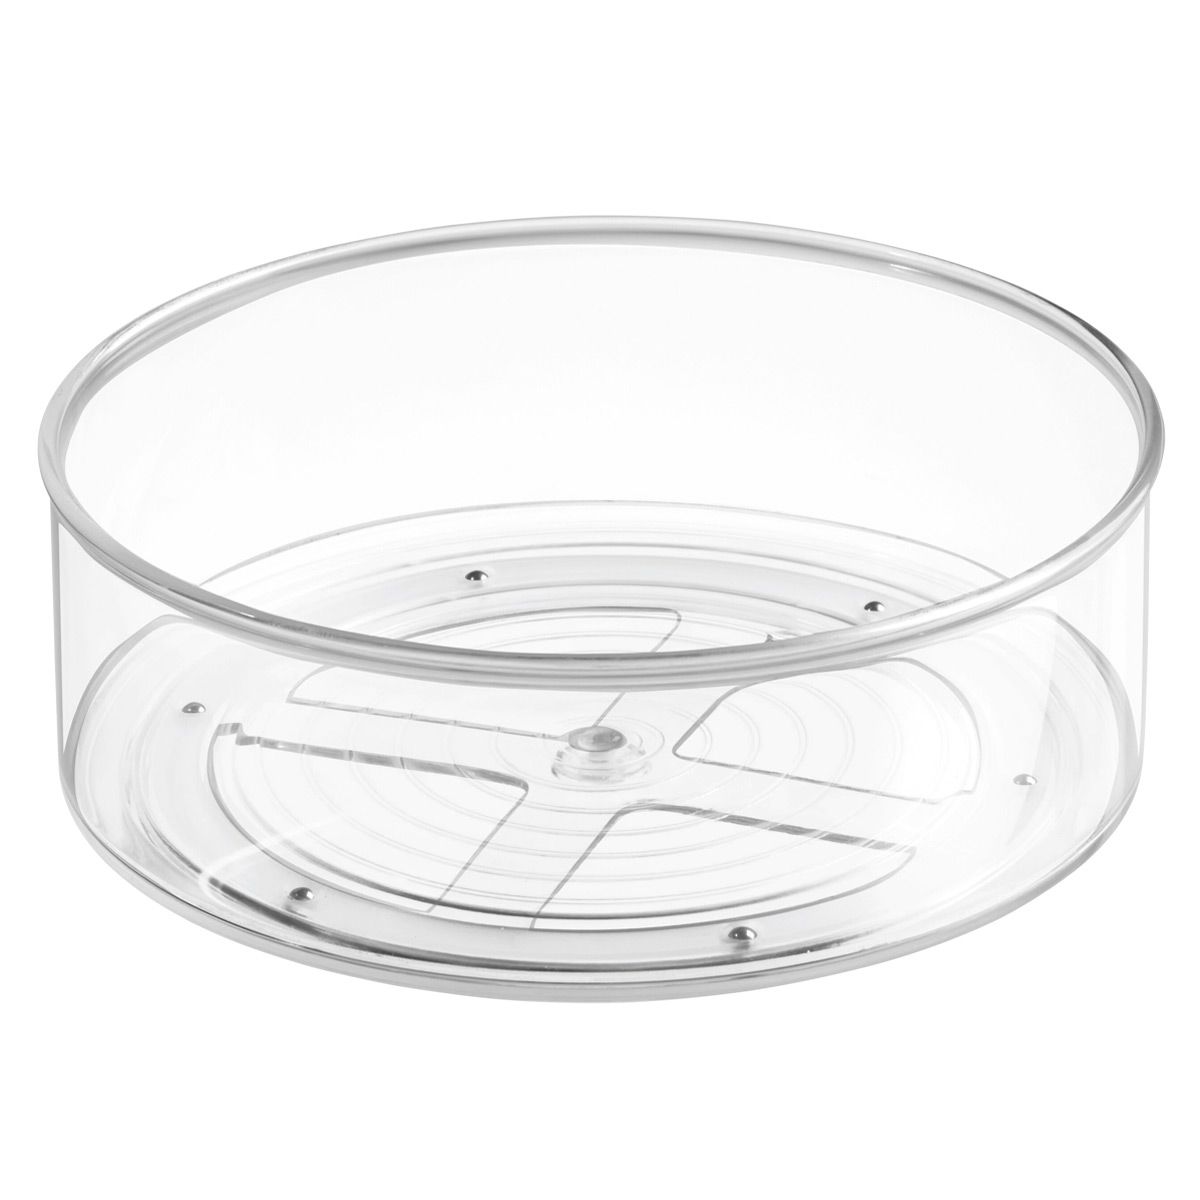 iDESIGN Linus Deep Turntable Clear | The Container Store